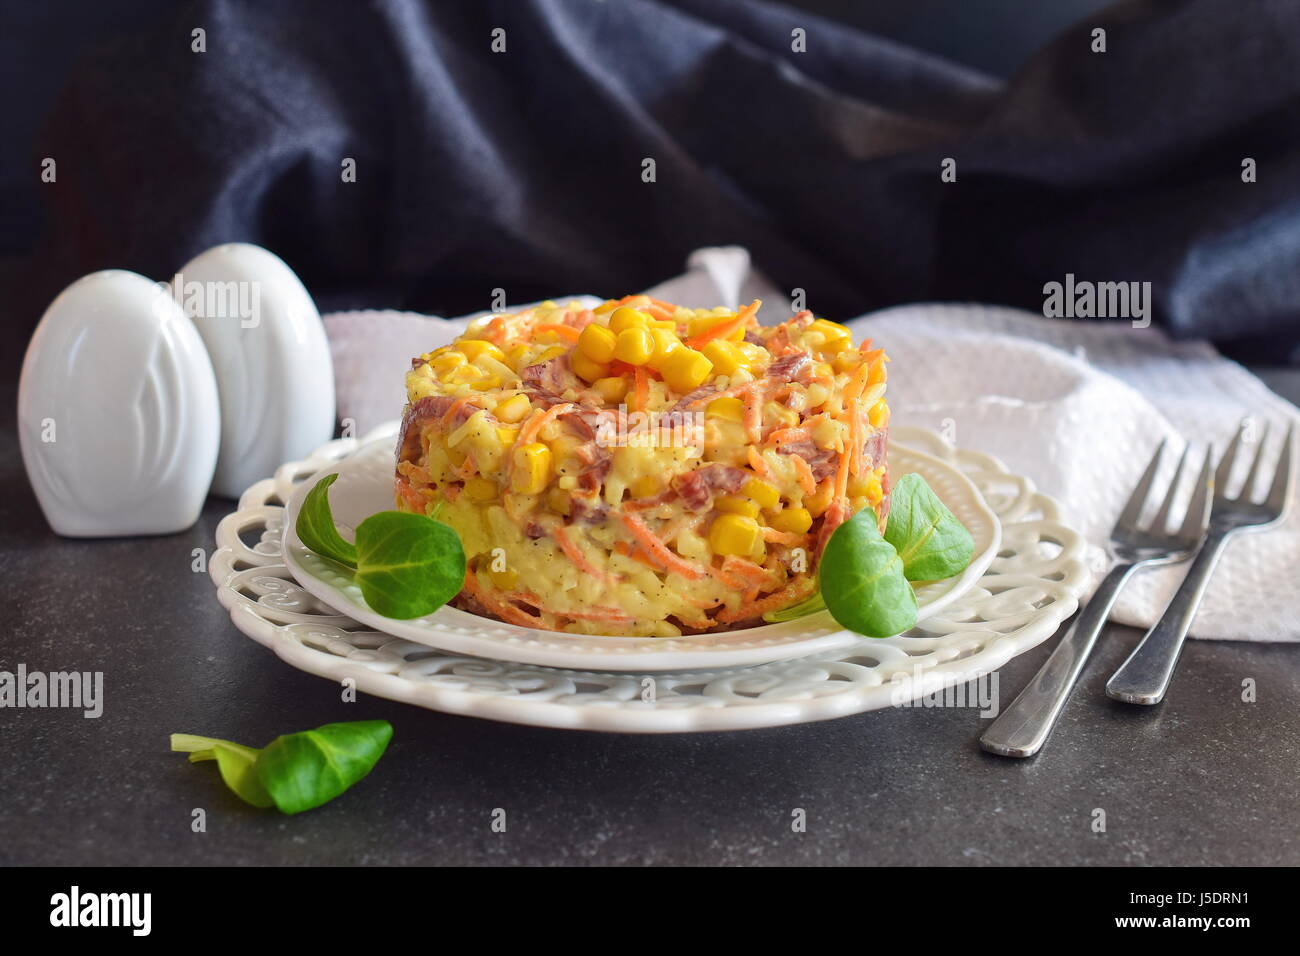 Salad with smoked sausage, corn, cheese, fresh carrot, egg, garlic and yogurt on a white plate on a abstract background. Stock Photo